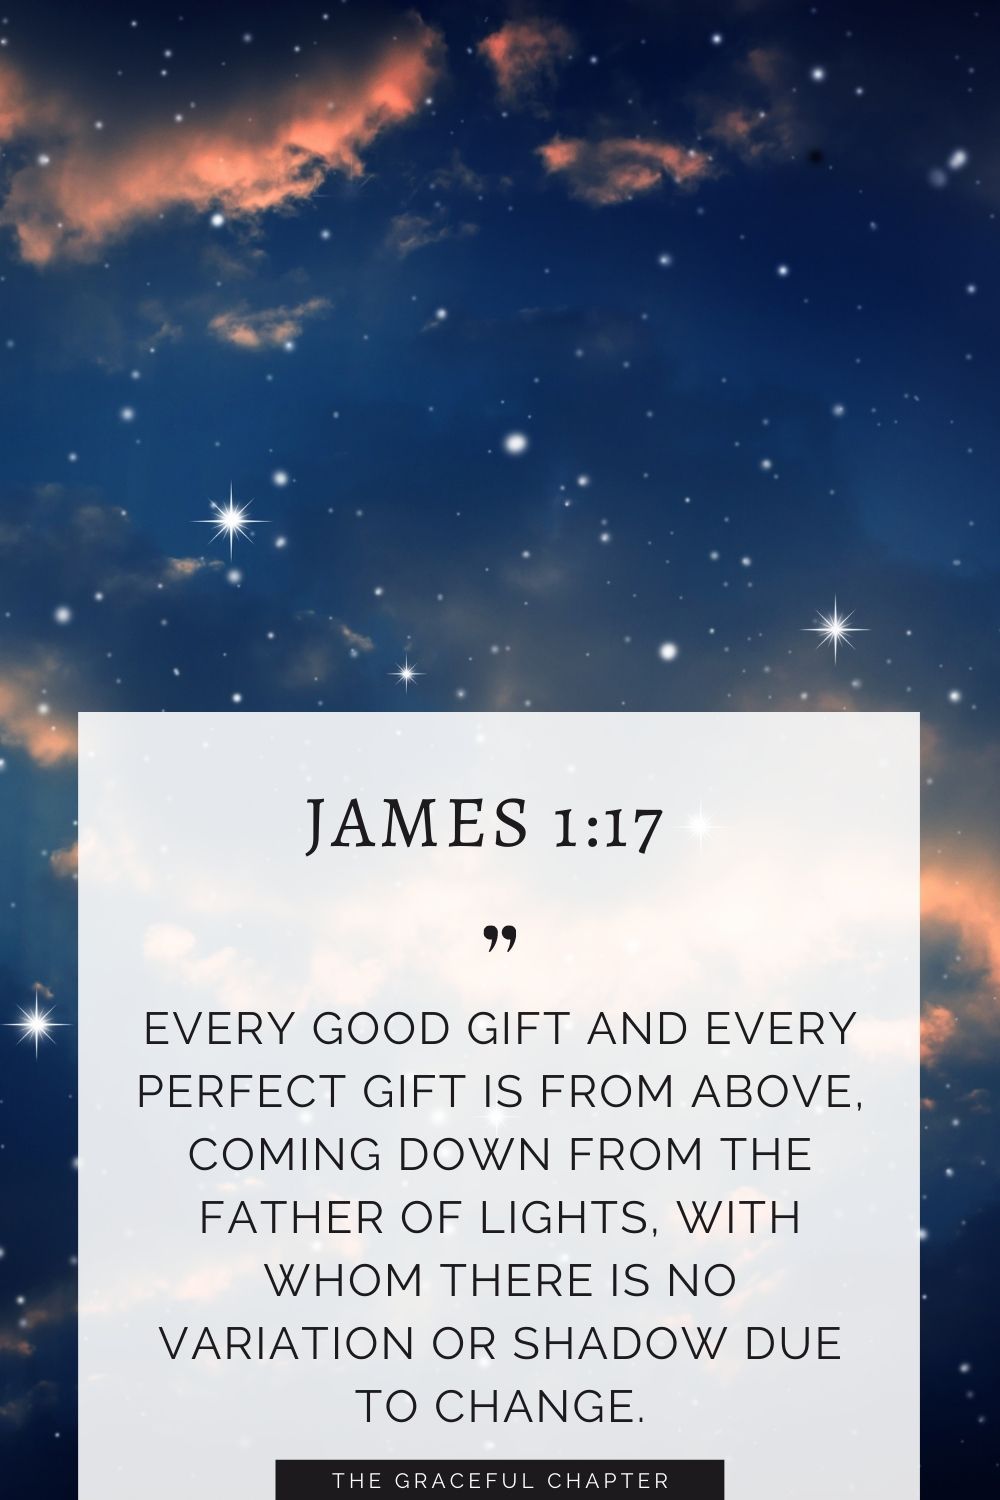 Every good gift and every perfect gift is from above, coming down from the Father of lights, with whom there is no variation or shadow due to change. James 1:17